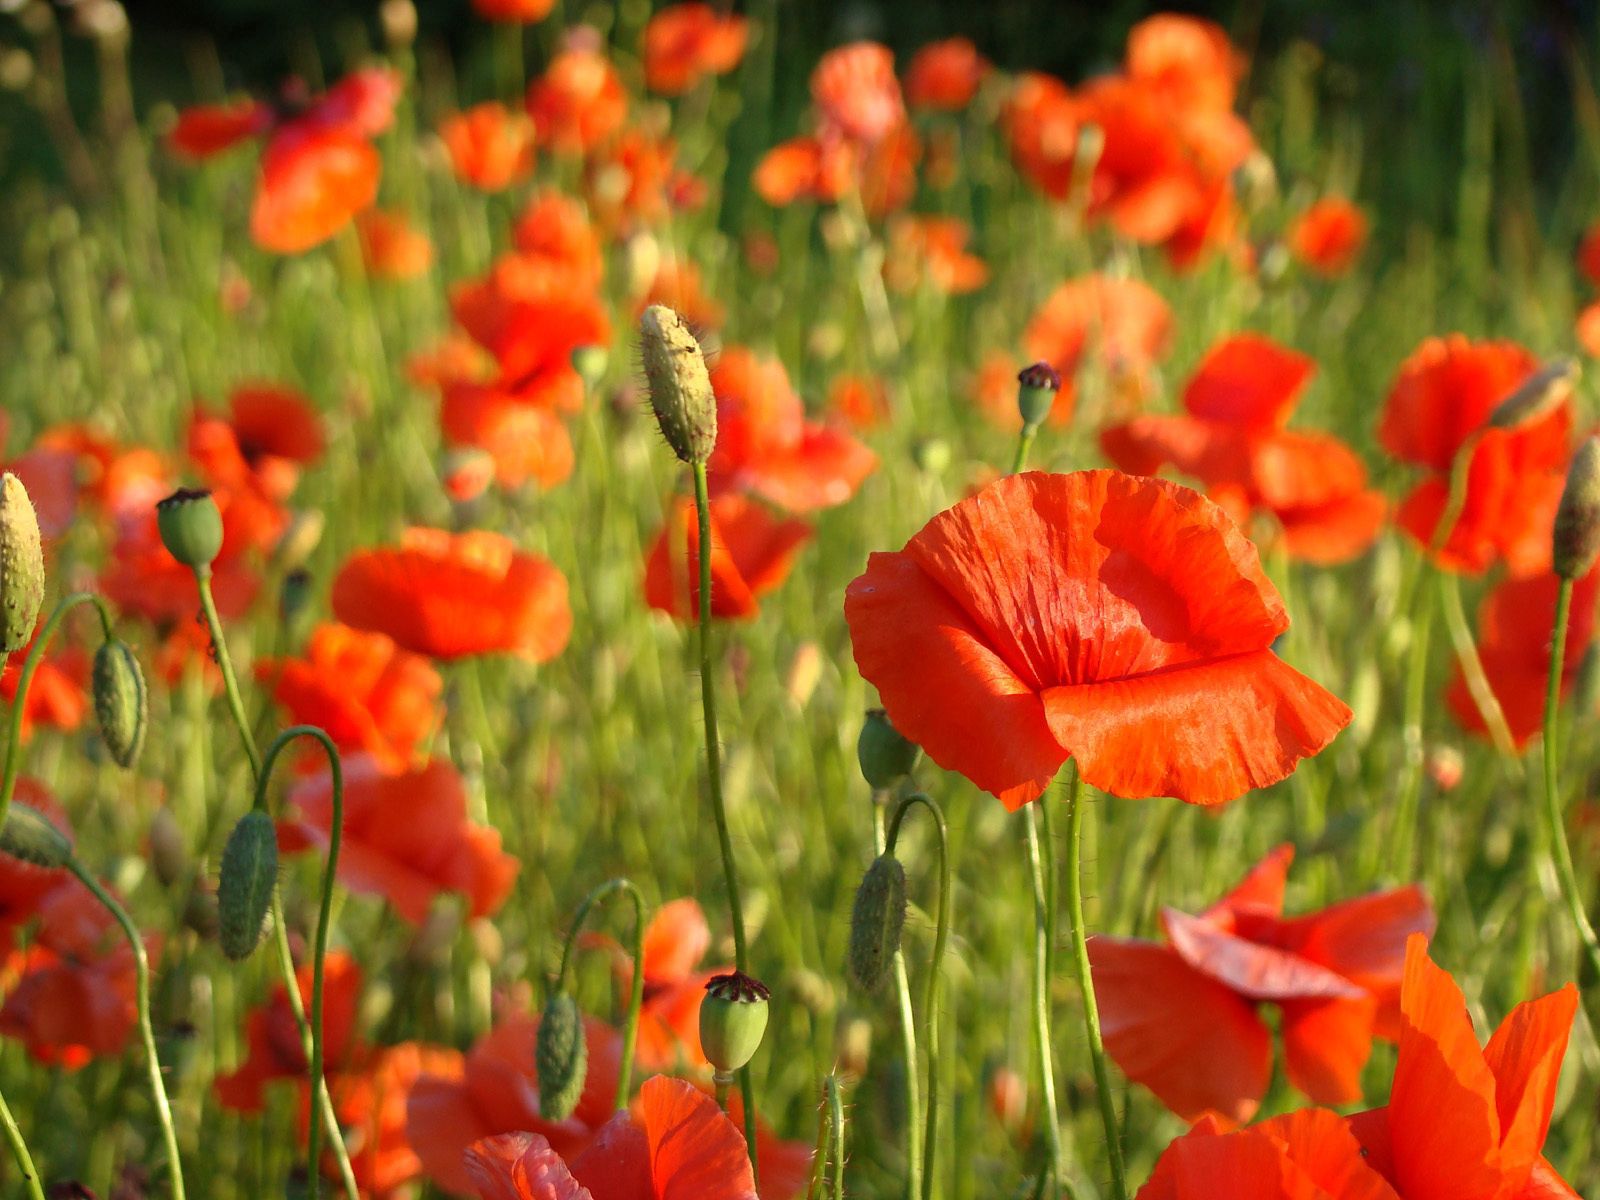 Best Poppy wallpapers for phone screen